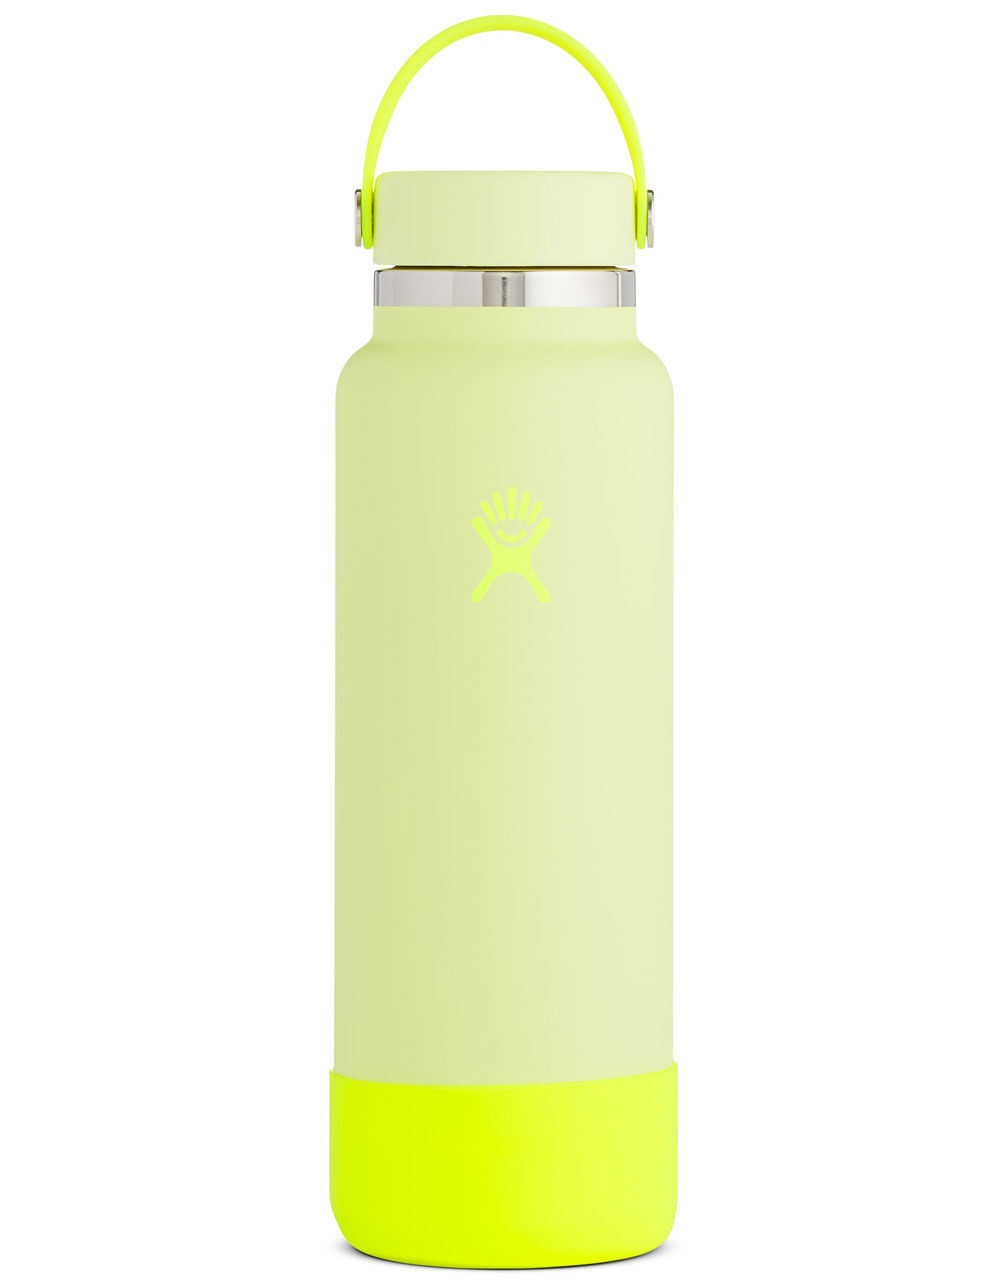 Up To 55% Off on Hydro Flask Wide Mouth Water